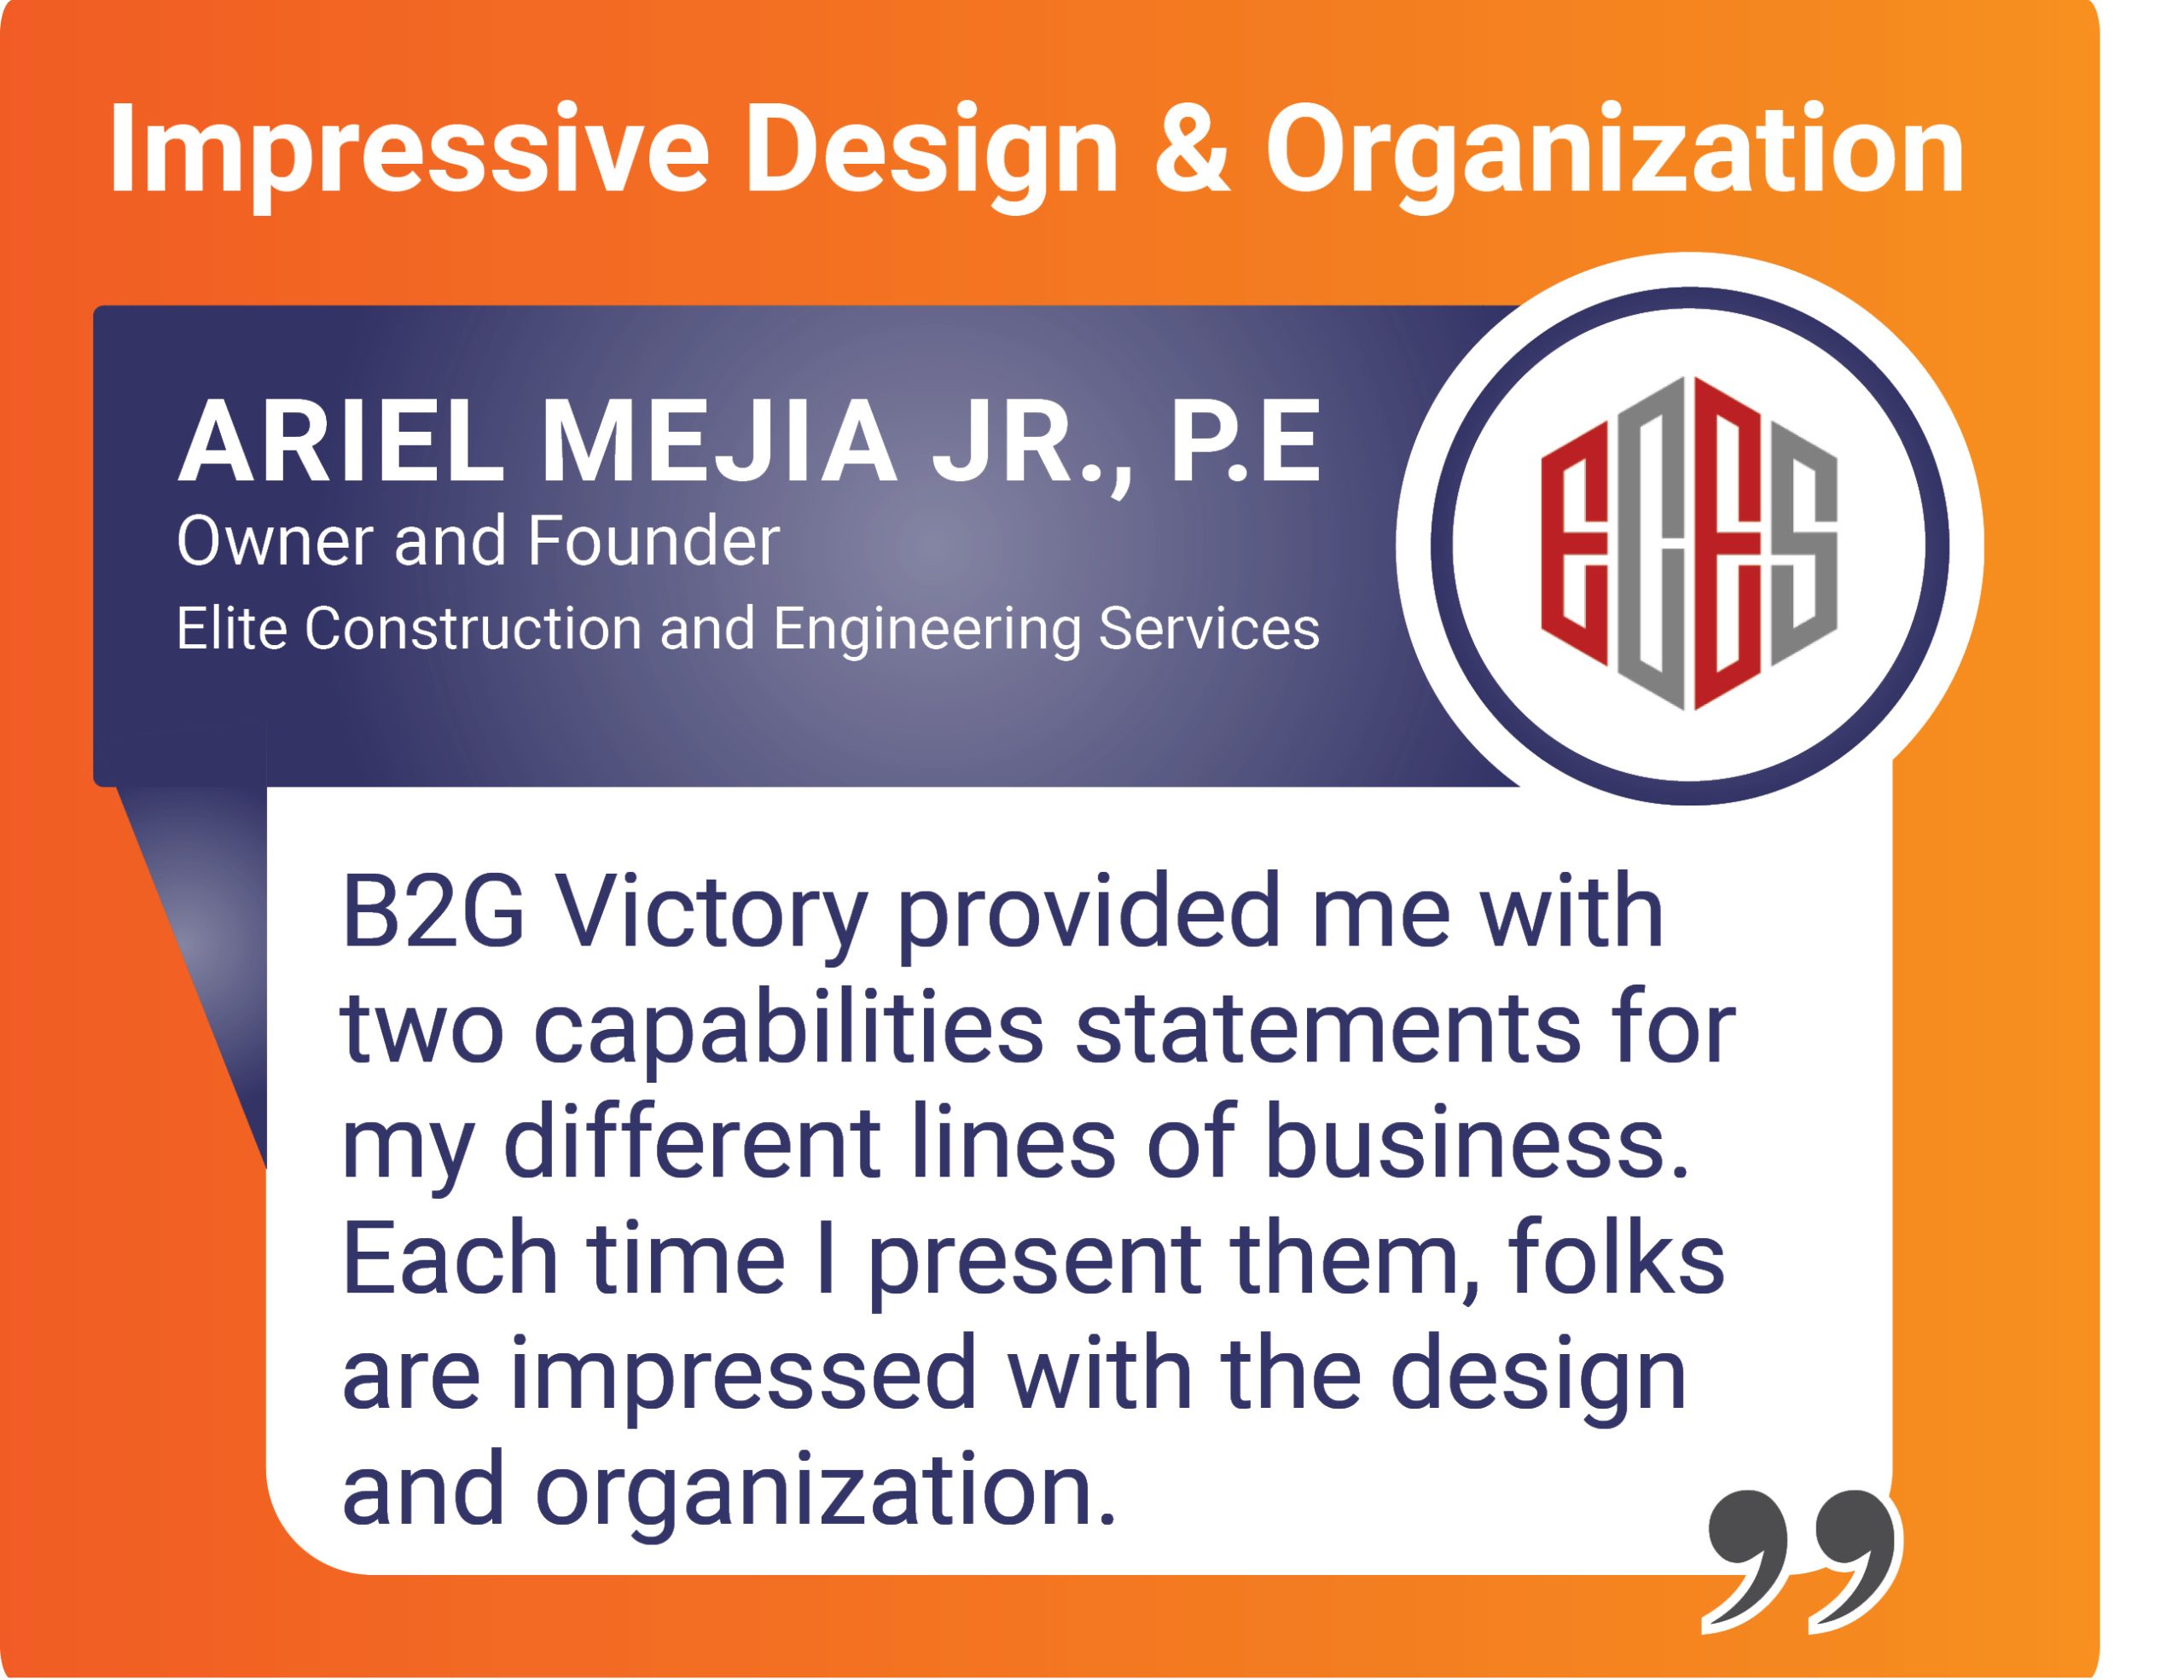 Testimonial from Ariel Mejia of Elite Construction and Engineering Services